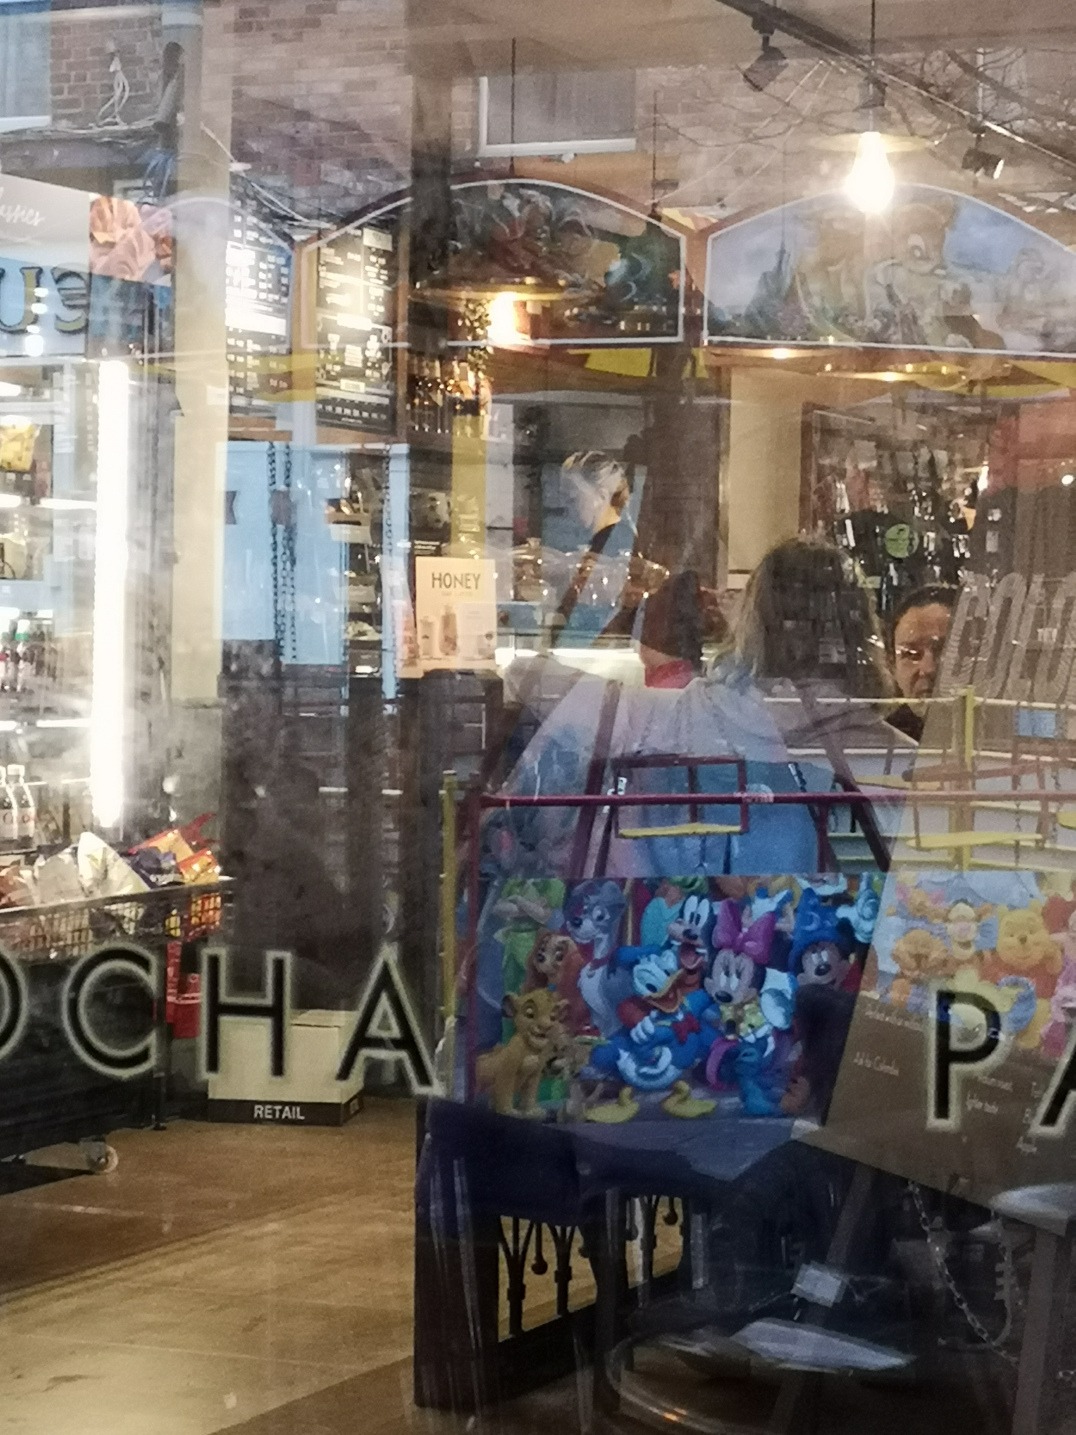 Photo of a cafe window from the outside, the window is reflecting multiple images from outside